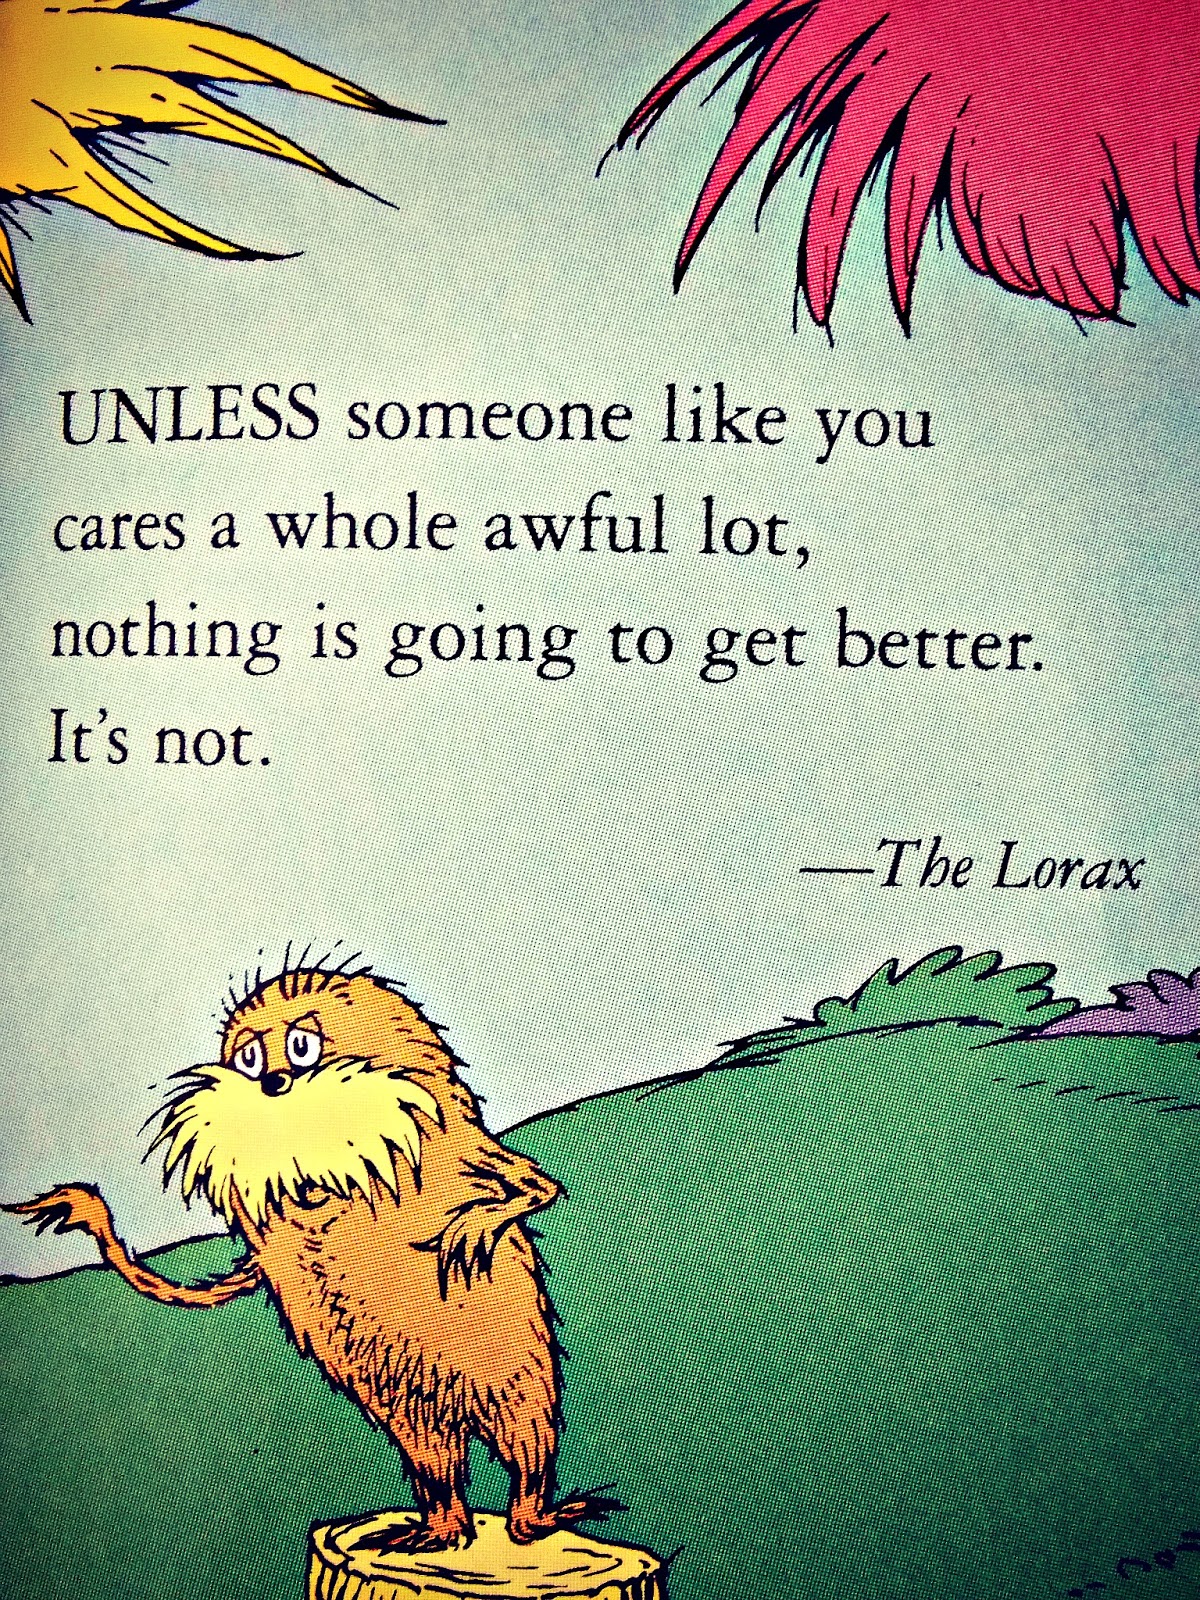 Dr Seuss Quotes About Growing Up. QuotesGram